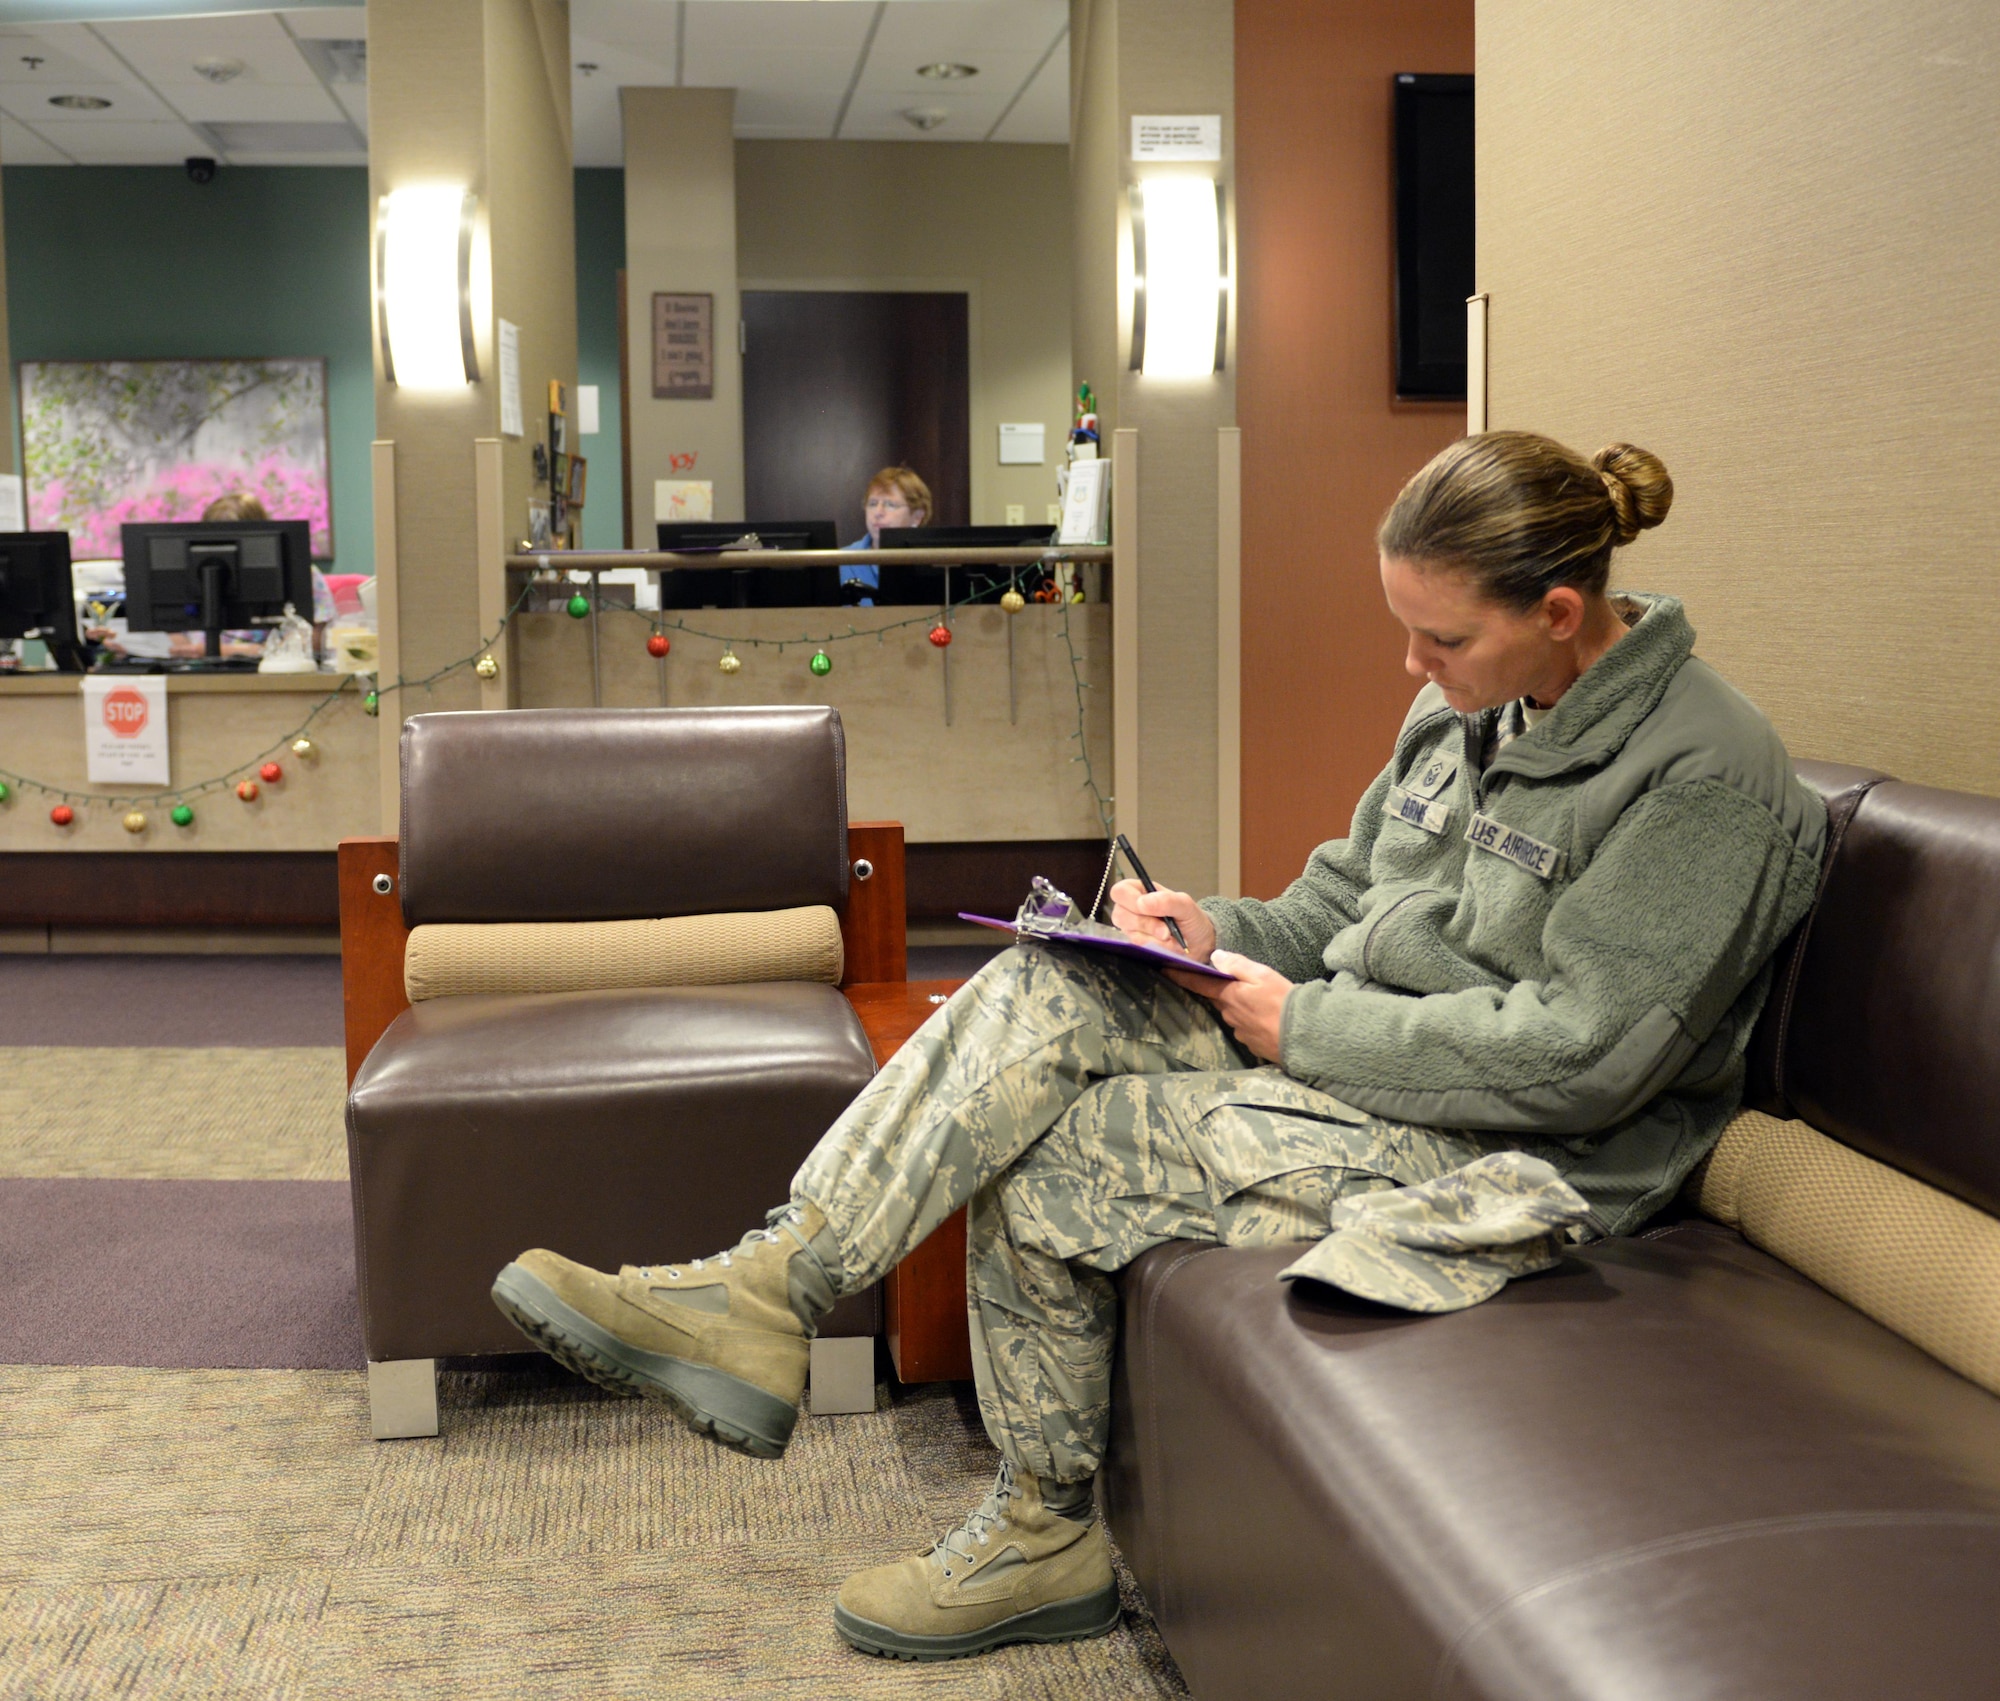 Master Sgt. Brandi Burns, 2nd Force Support Squadron first sergeant, fills out paperwork for an appointment at the 2nd Medical Group at Barksdale Air Force Base, La., Dec. 28, 2015. The 2nd MDG has an appointment reminder system in place which calls patients two days prior to an appointment with a message identifying the appointment date and time. However, the appointment reminder system uses phone numbers listed in the Defense Enrollment Eligibility Reporting System, so it’s critical to maintain updated contact information in DEERS. (U.S. Air Force photo/Airman 1st Class Curt Beach)